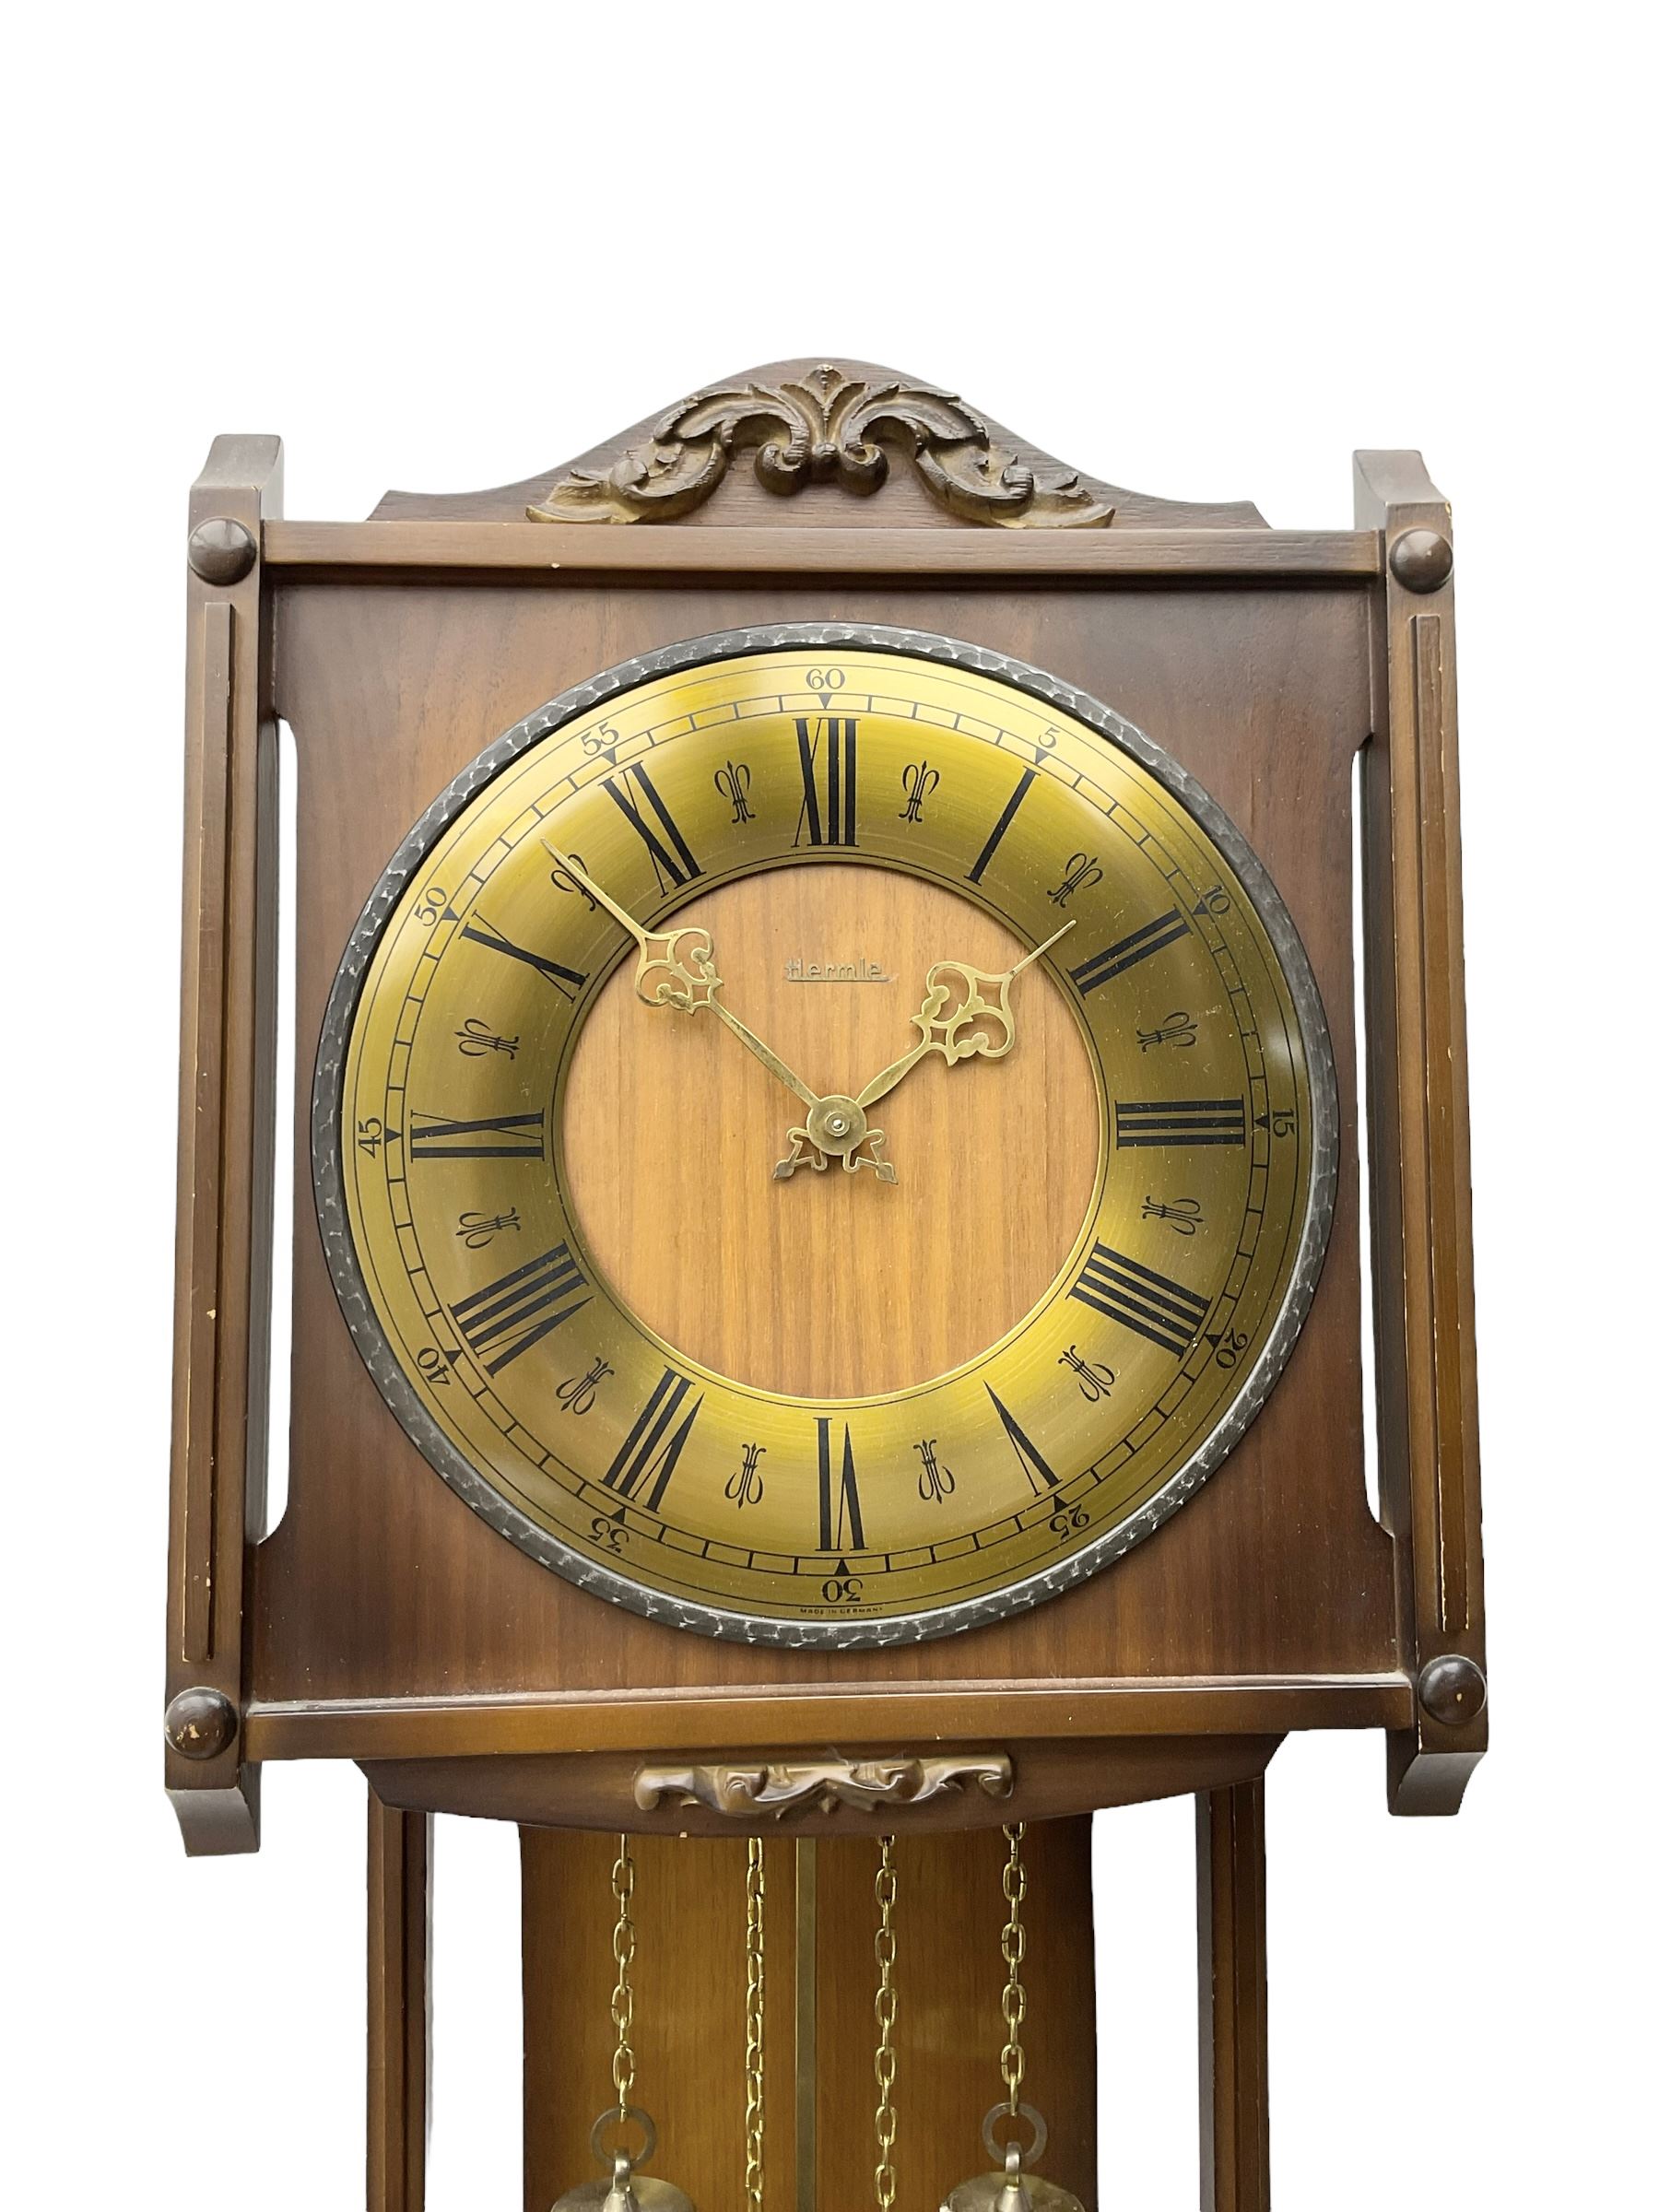 Hermle German double weight driven wall clock - Image 3 of 3